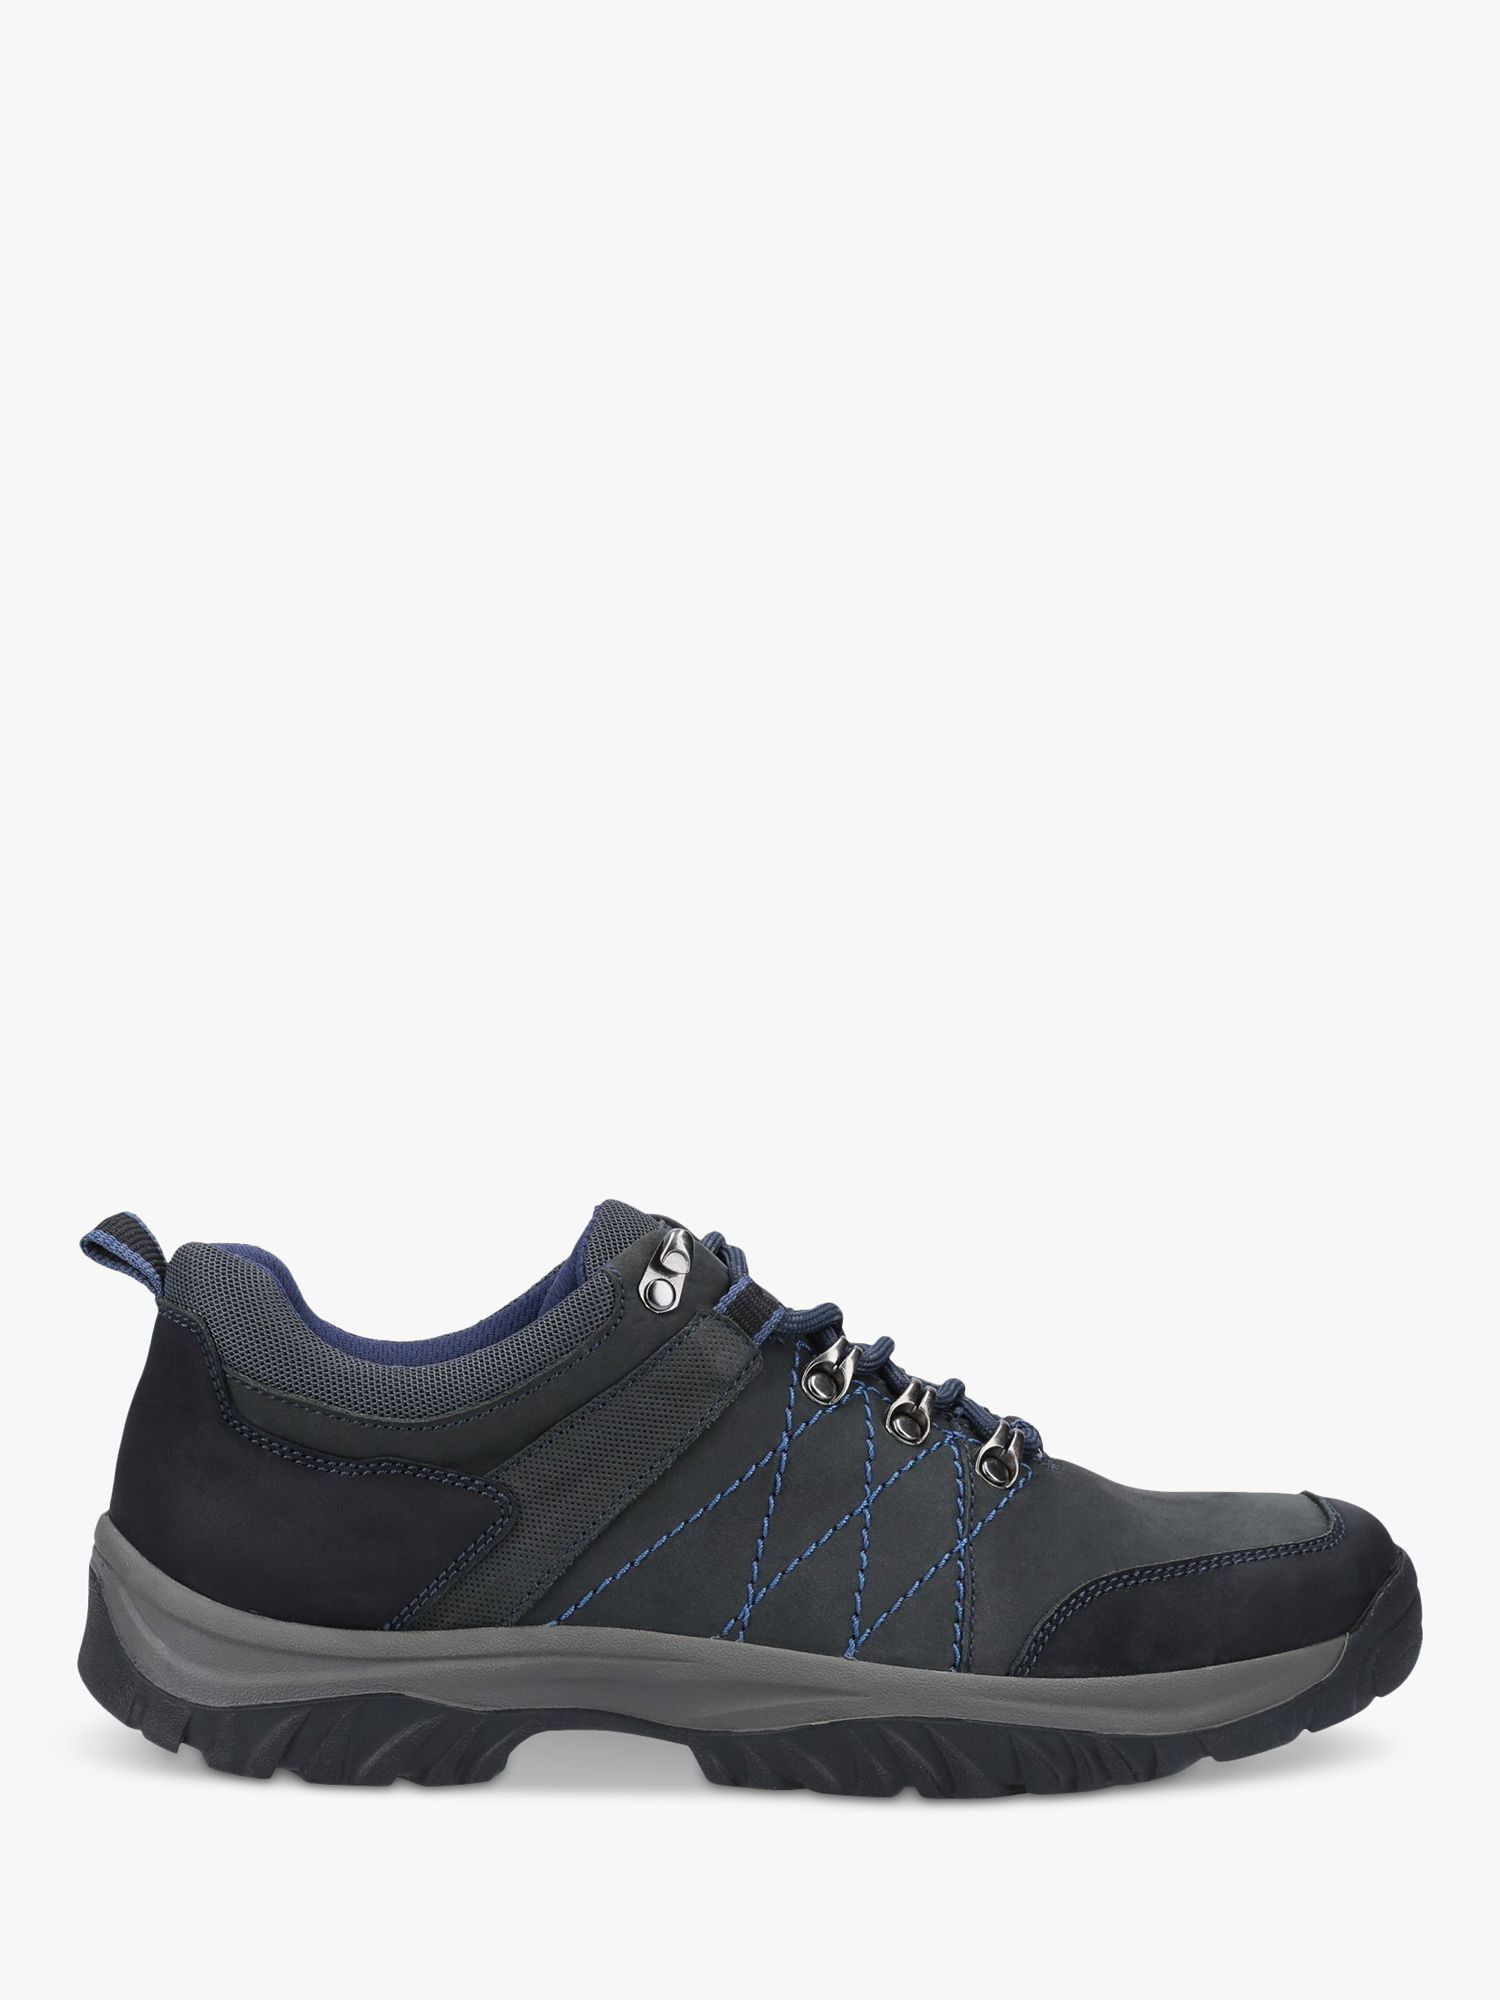 Cotswold Toddington Nubuck Lace Up Trainers, Navy at John Lewis & Partners